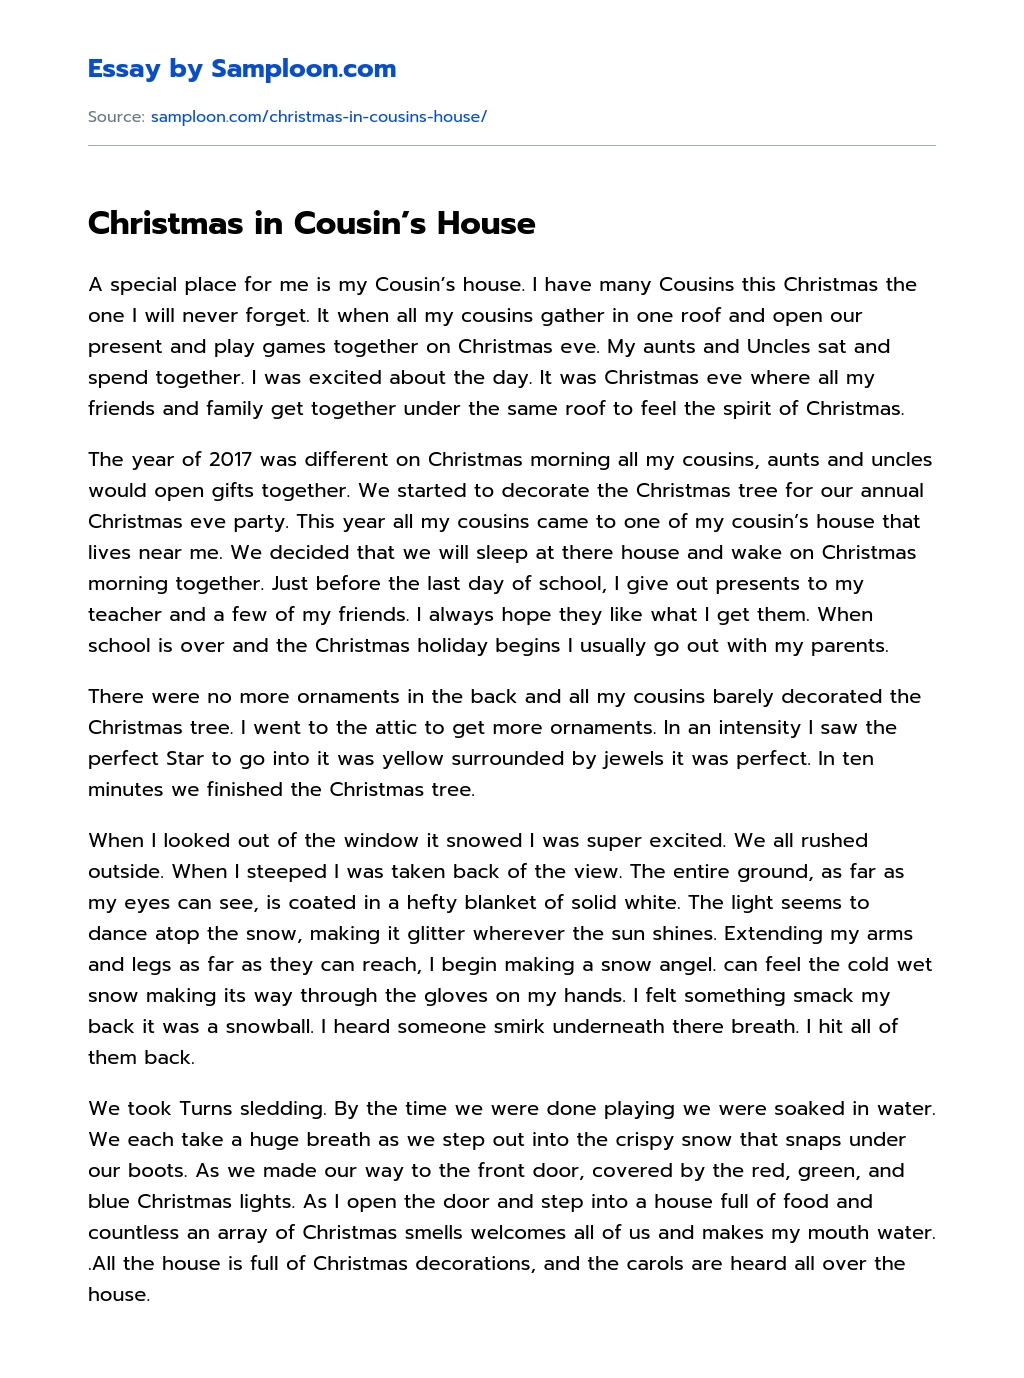 Christmas in Cousin’s House essay